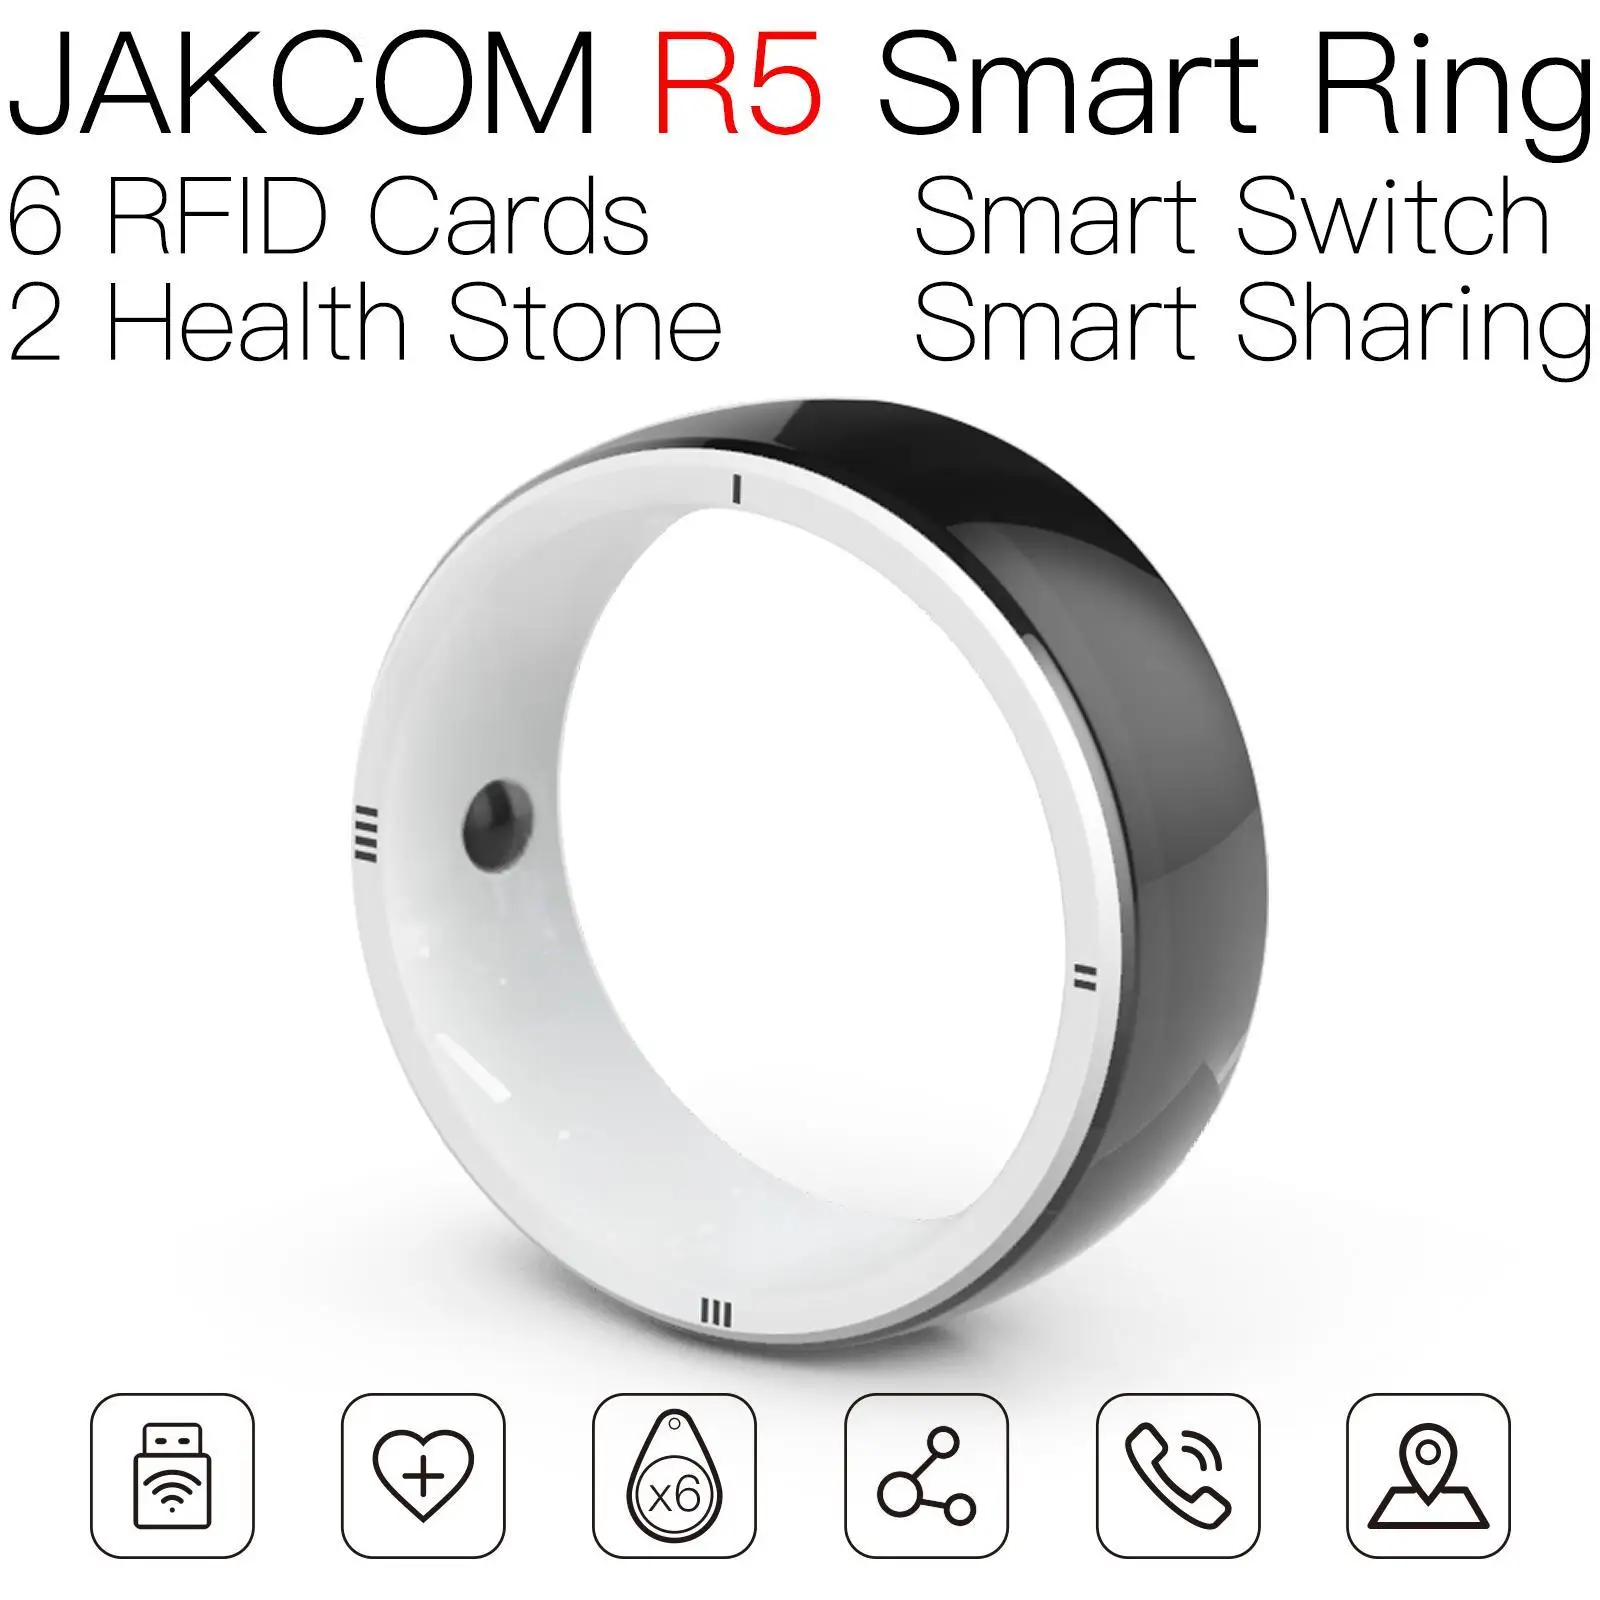 

JAKCOM R5 Smart Ring Newer than key tag hf uid changeable emv chip card rfid write and read iso14443a 25mm nfc factory s9 t9